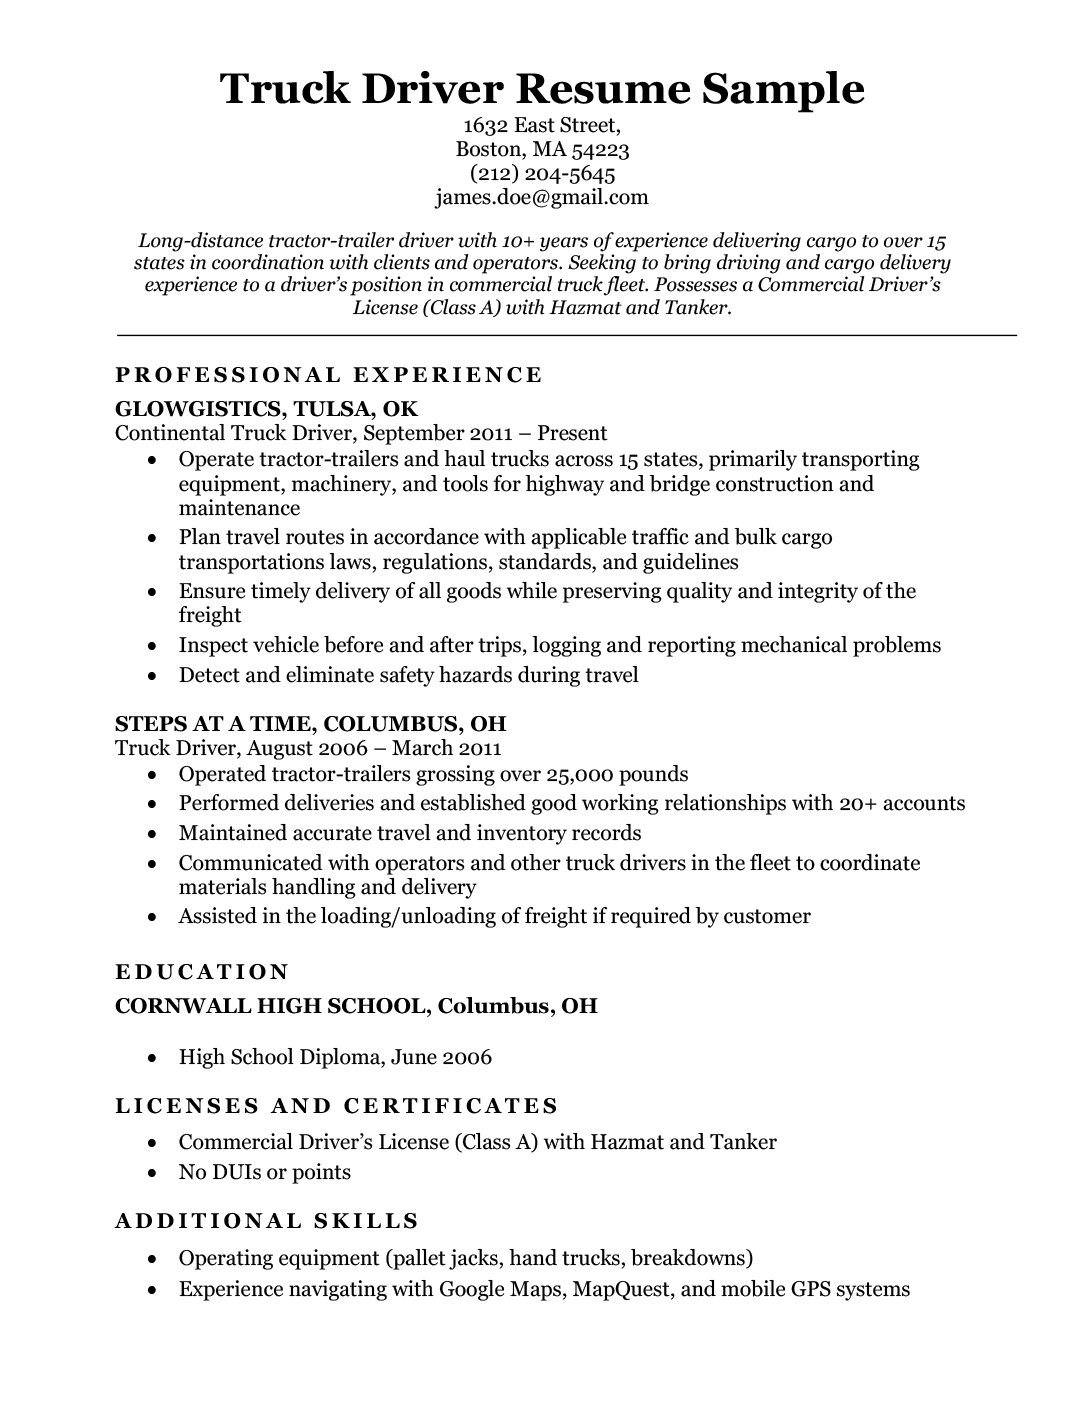 Truck Driver Resume Cover Letter from resumecompanion.com